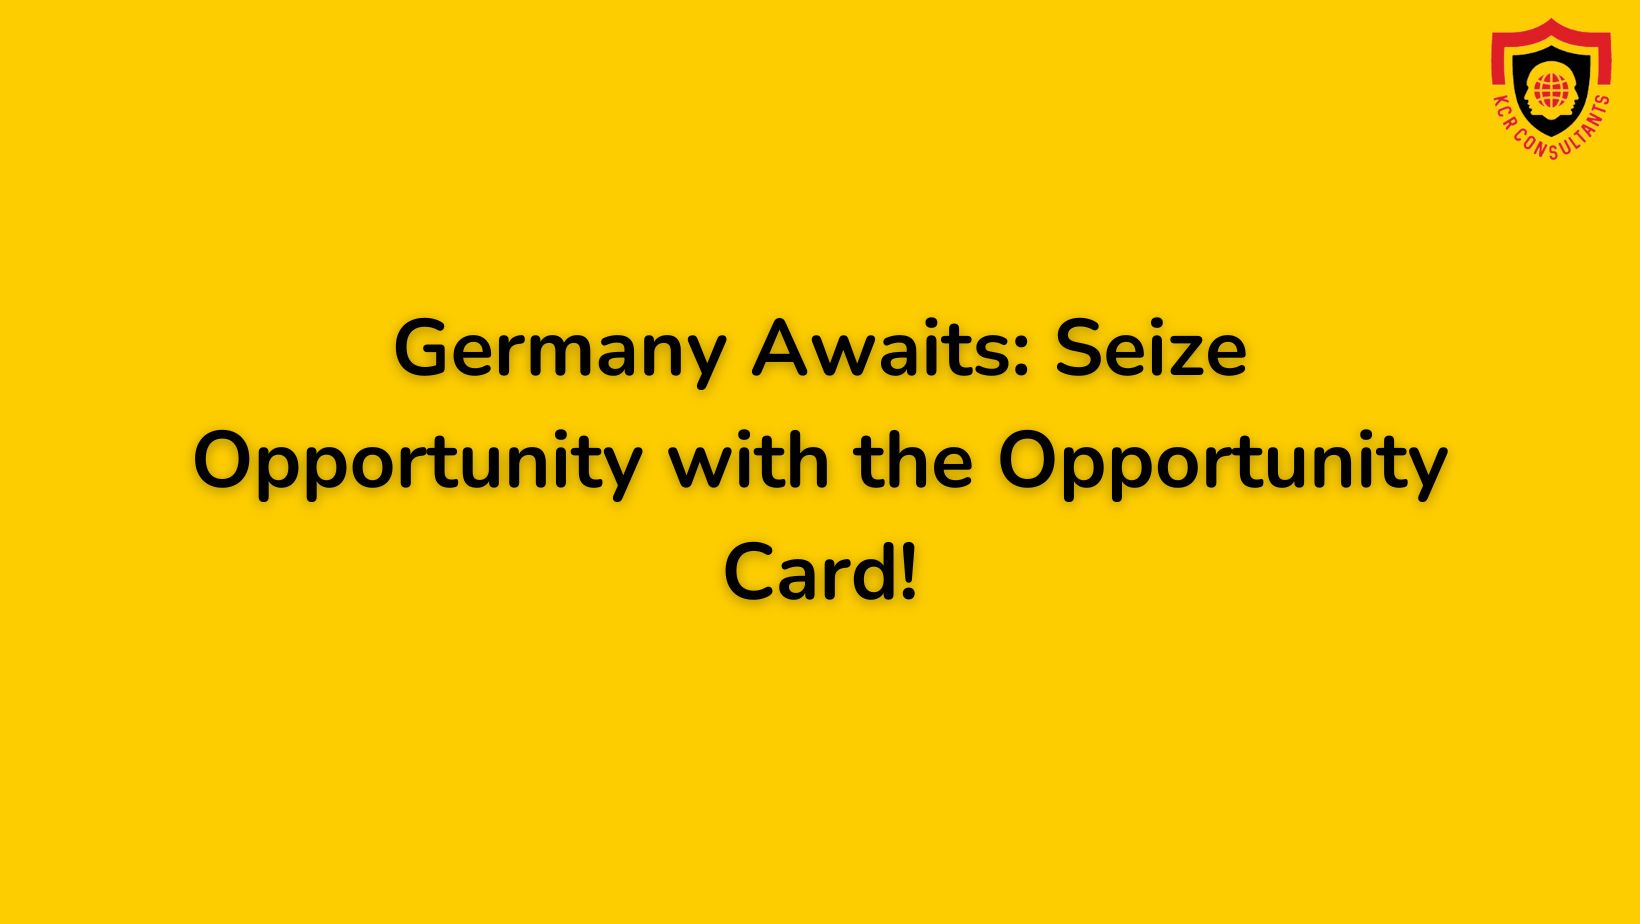 Opportunity Card Germany - kcr consultants - Student benefits in Germany